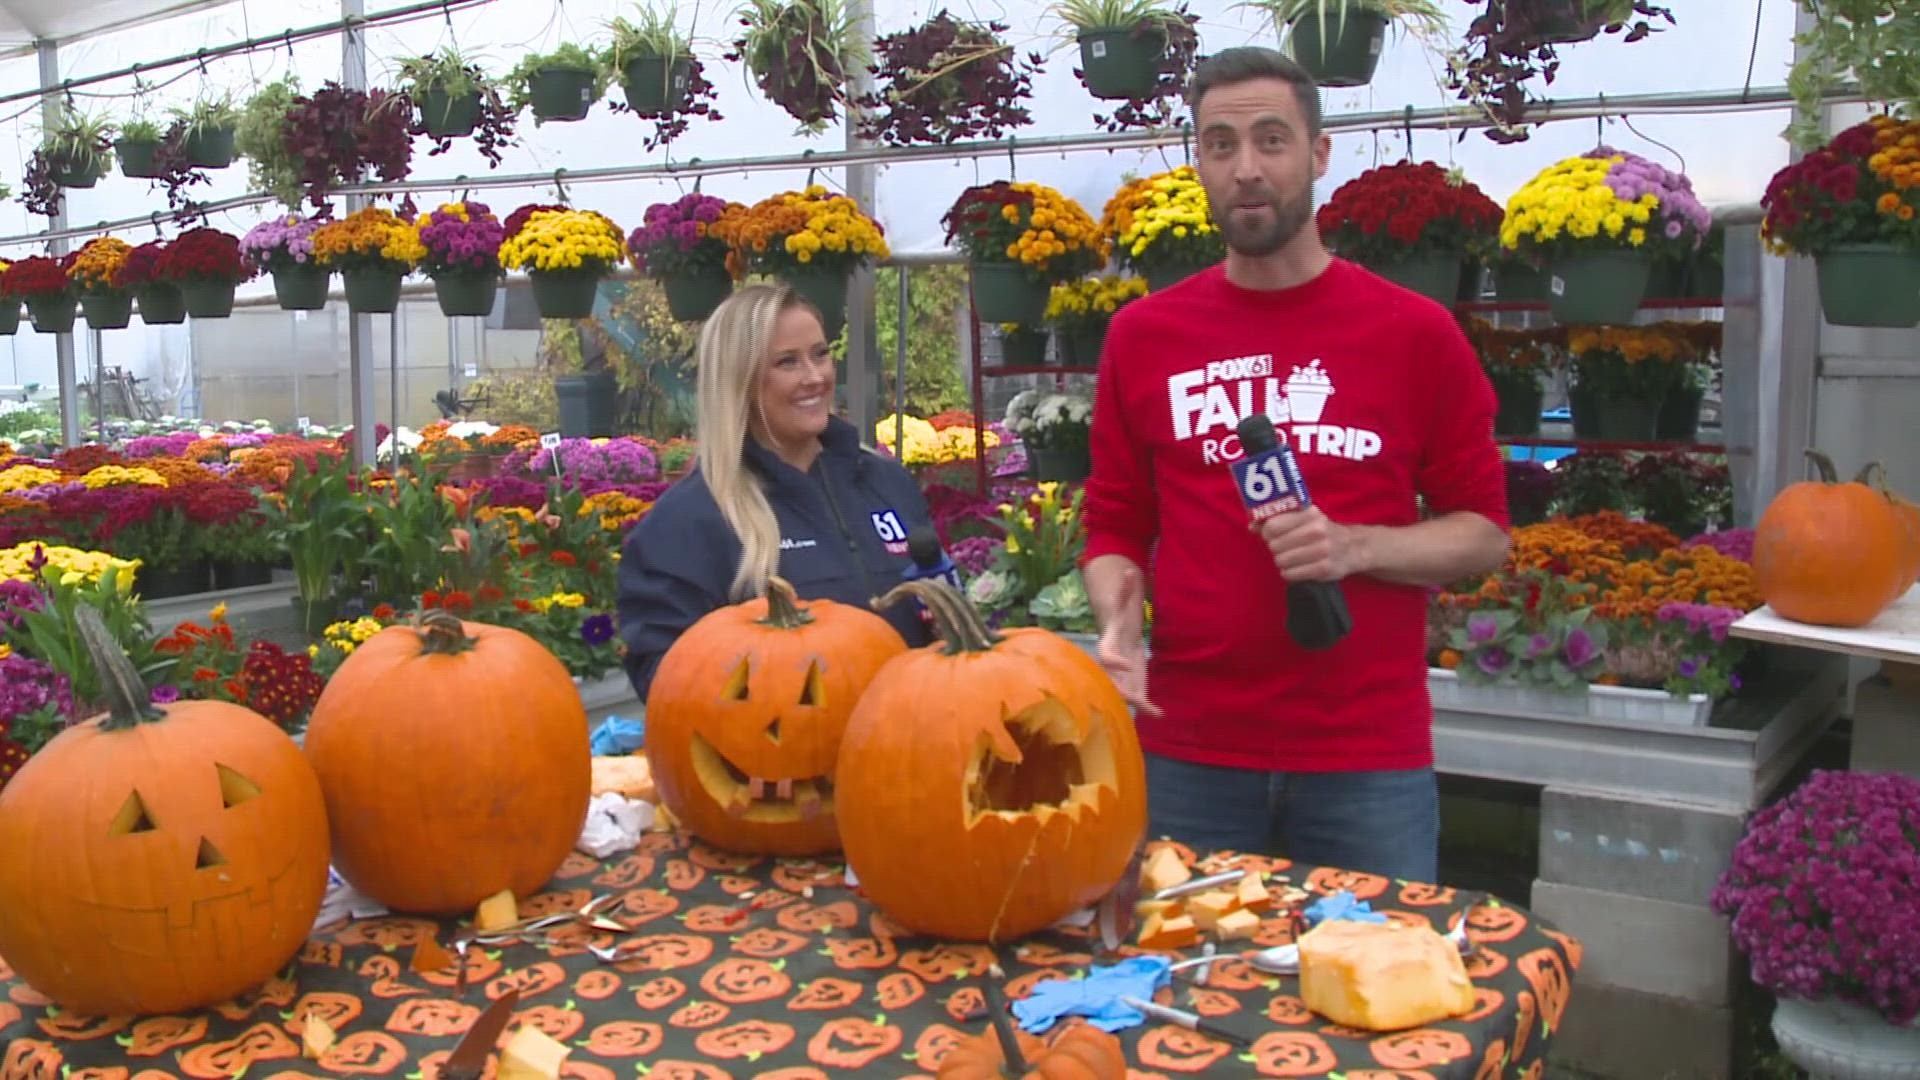 Keith McGilvery and Lauren Zenzie put the pumpkin carving and decorating skills to the test at Beaumont Farms in Wallingford.